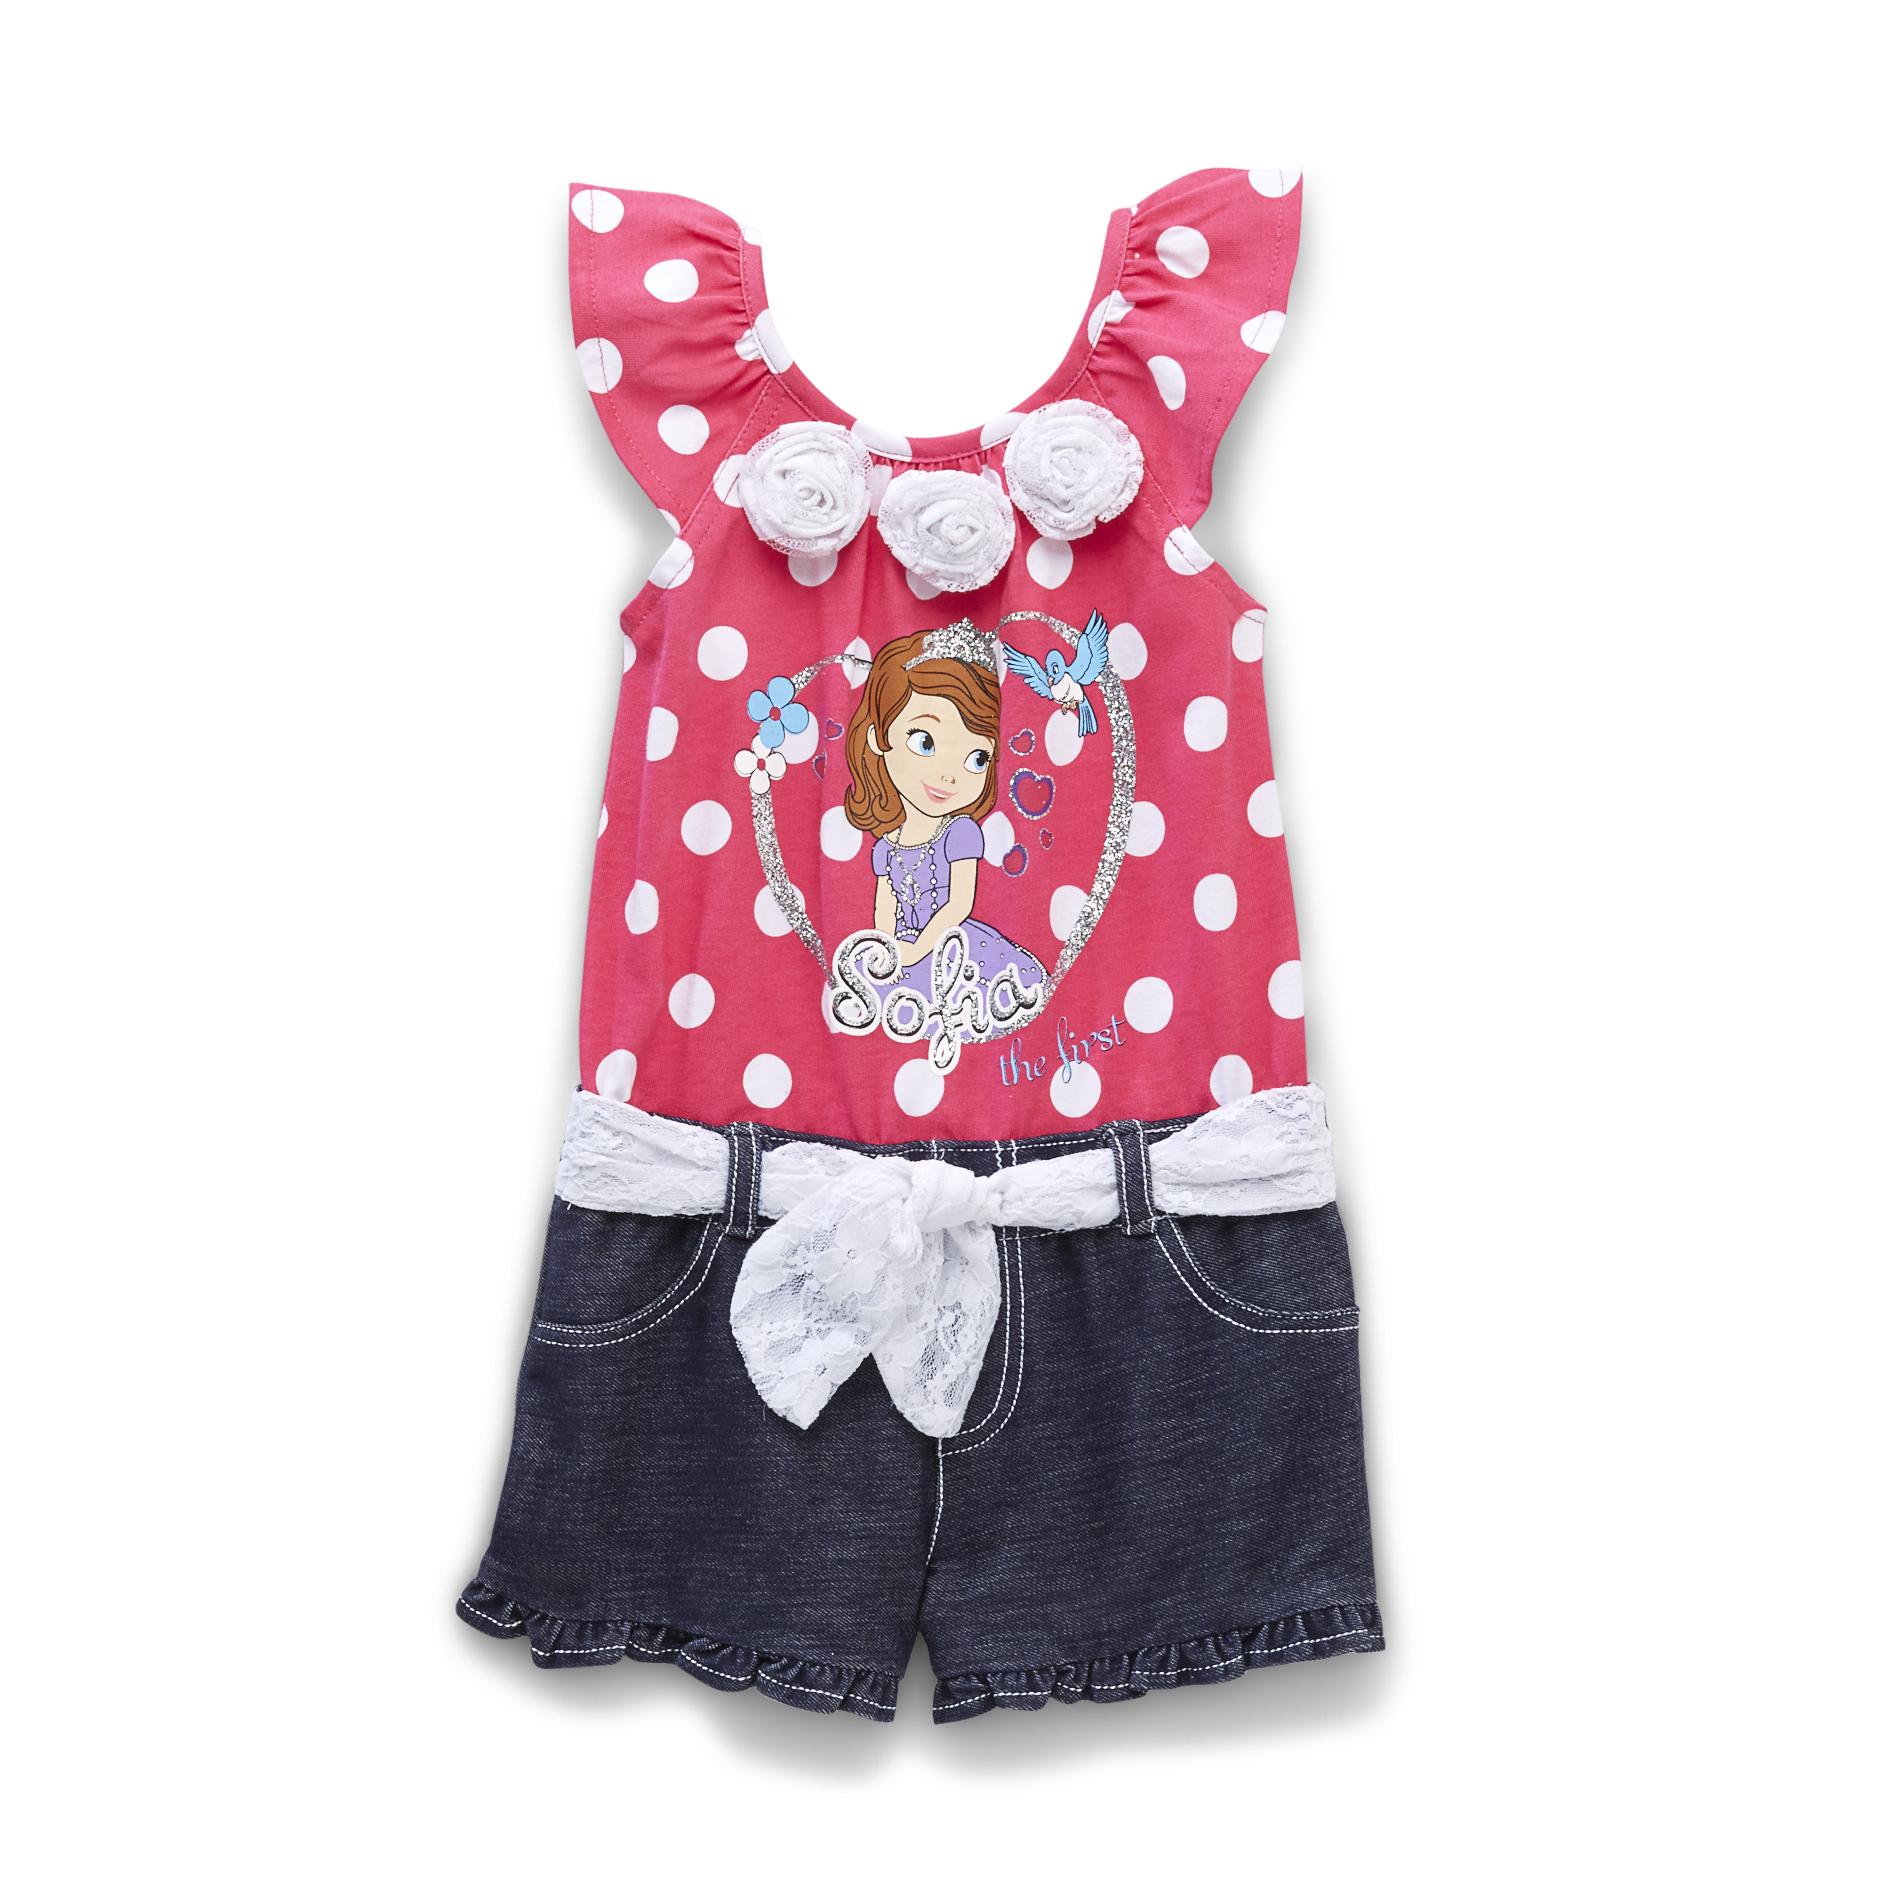 Disney Princess Toddler Girl's Romper - Sofia The First